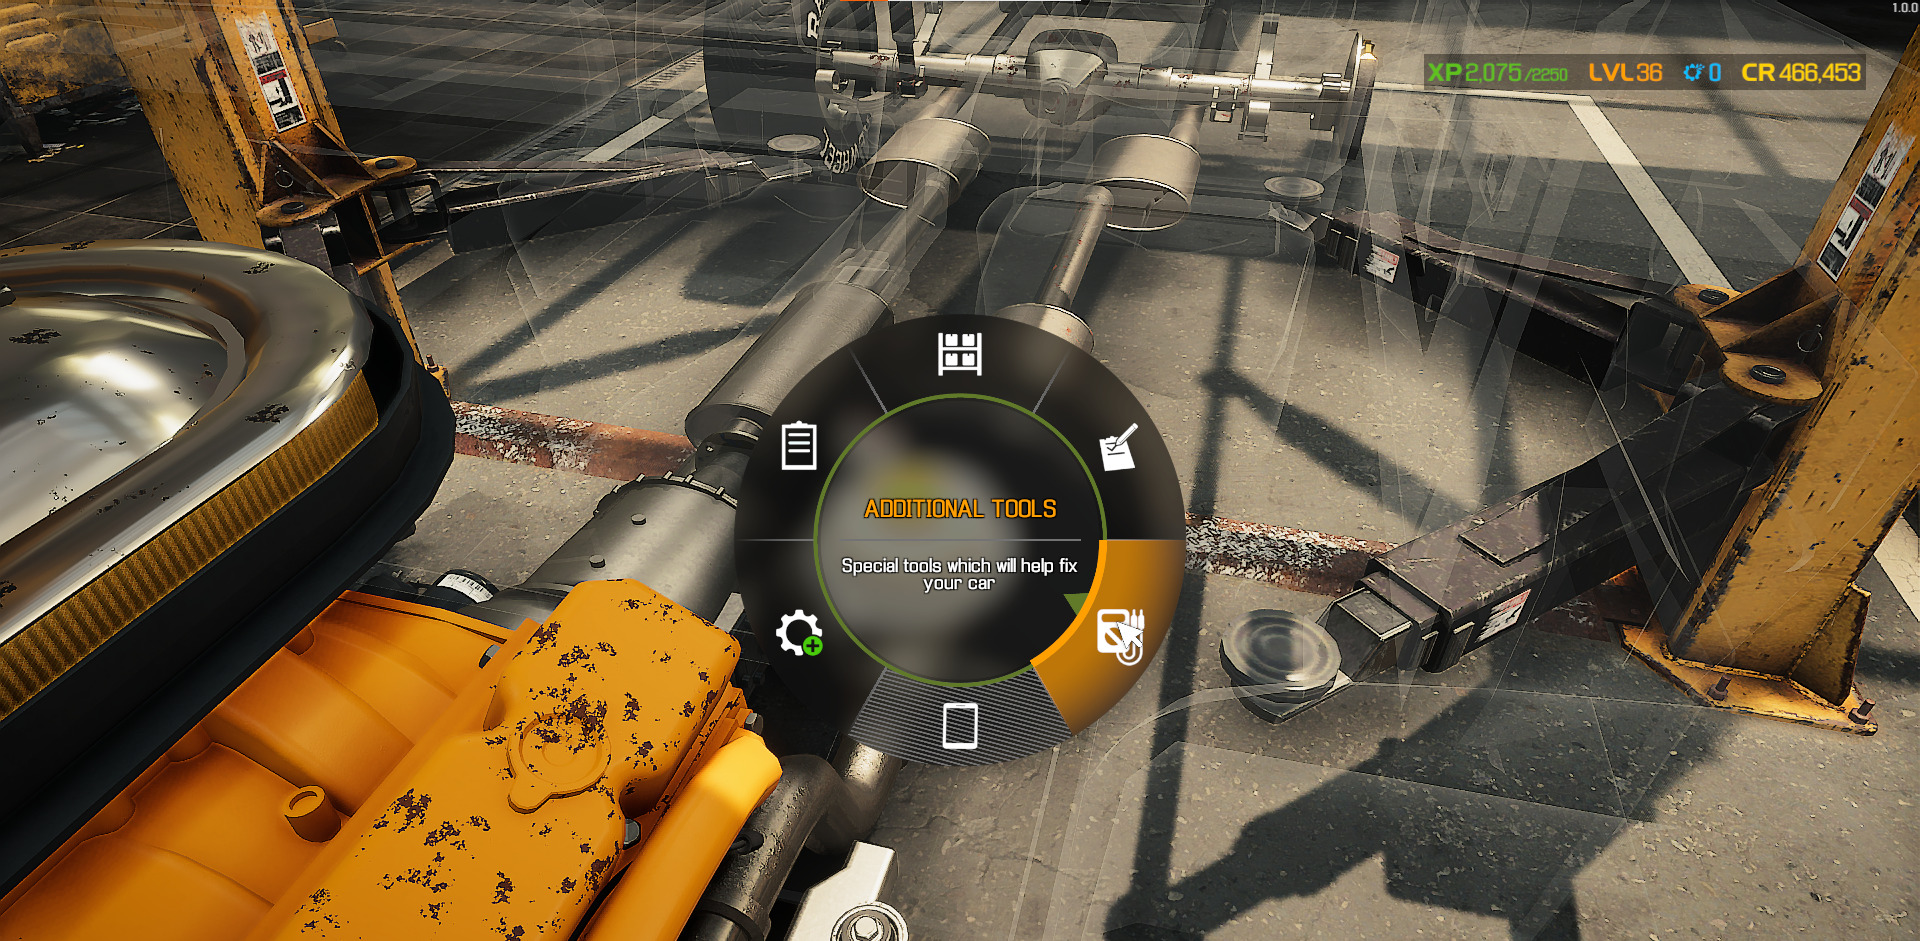 A screenshot showing the "Additional Tools" option in the Pie Menu in Car Mechanic Simulator